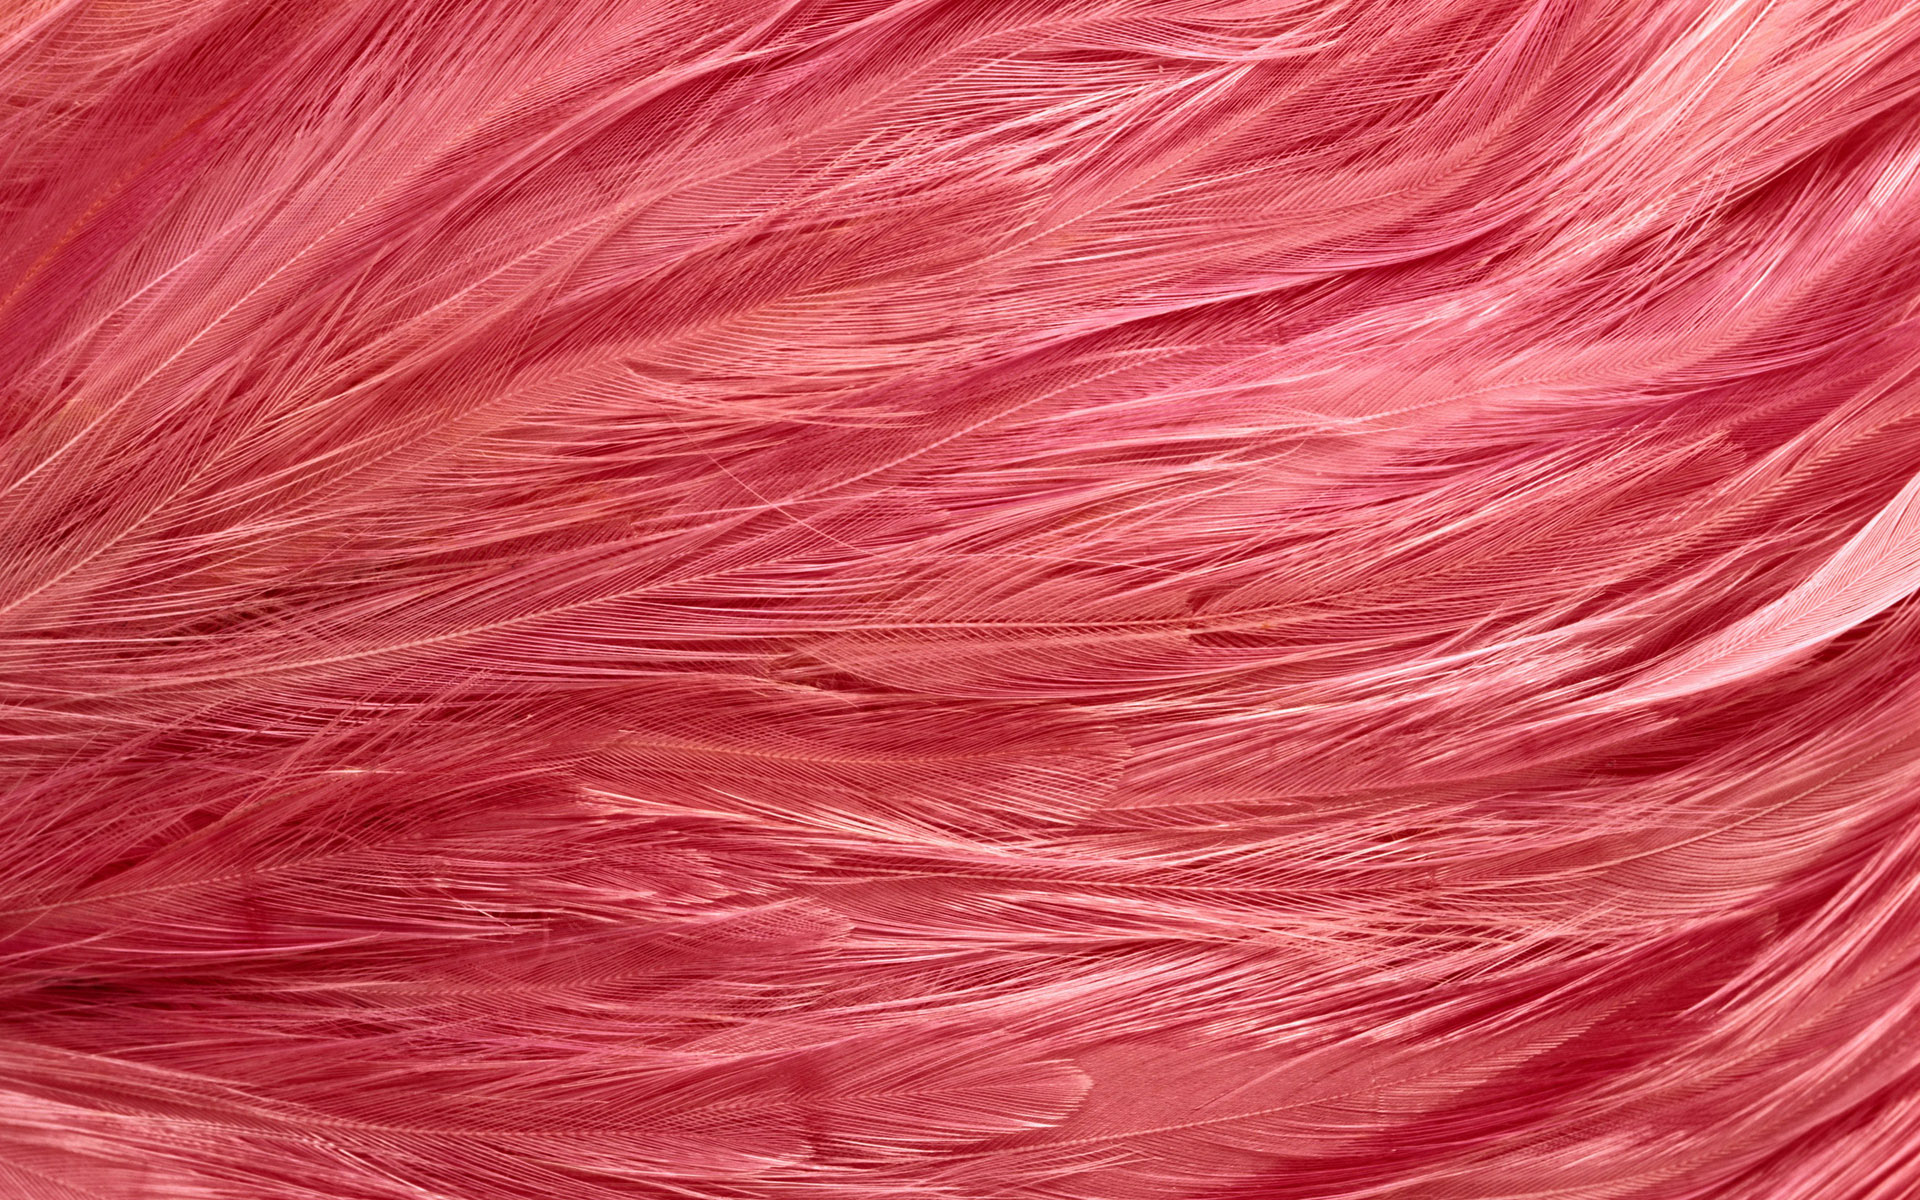  , texture feather, download background, photo, image, pink feather background texture